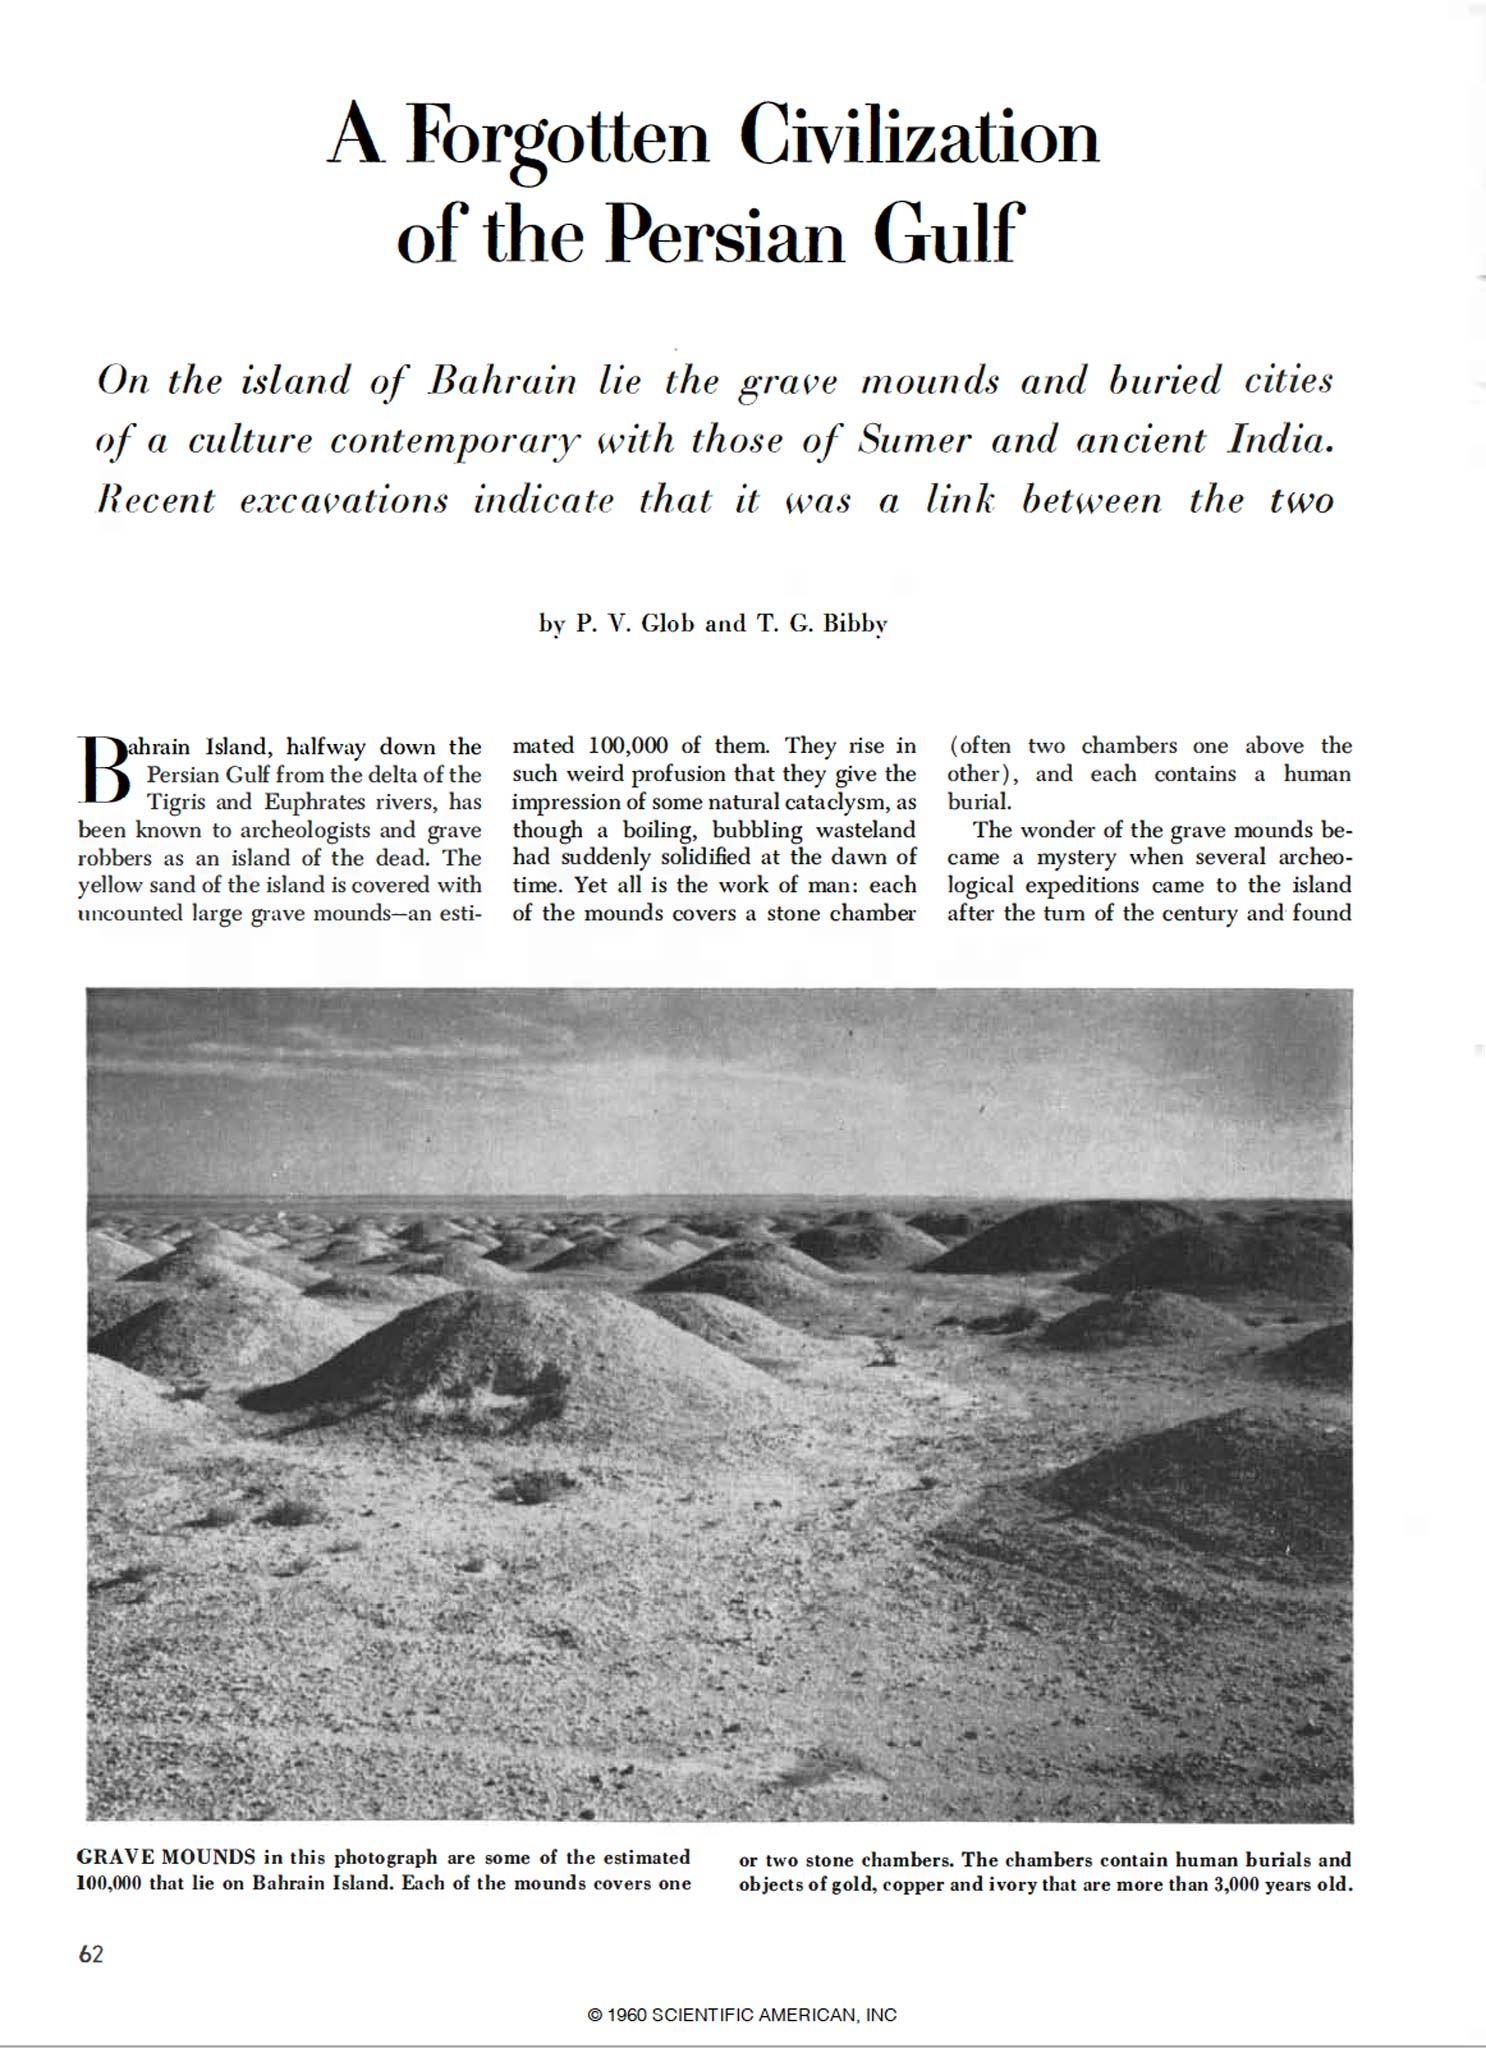 magazine spread showing burial mounds